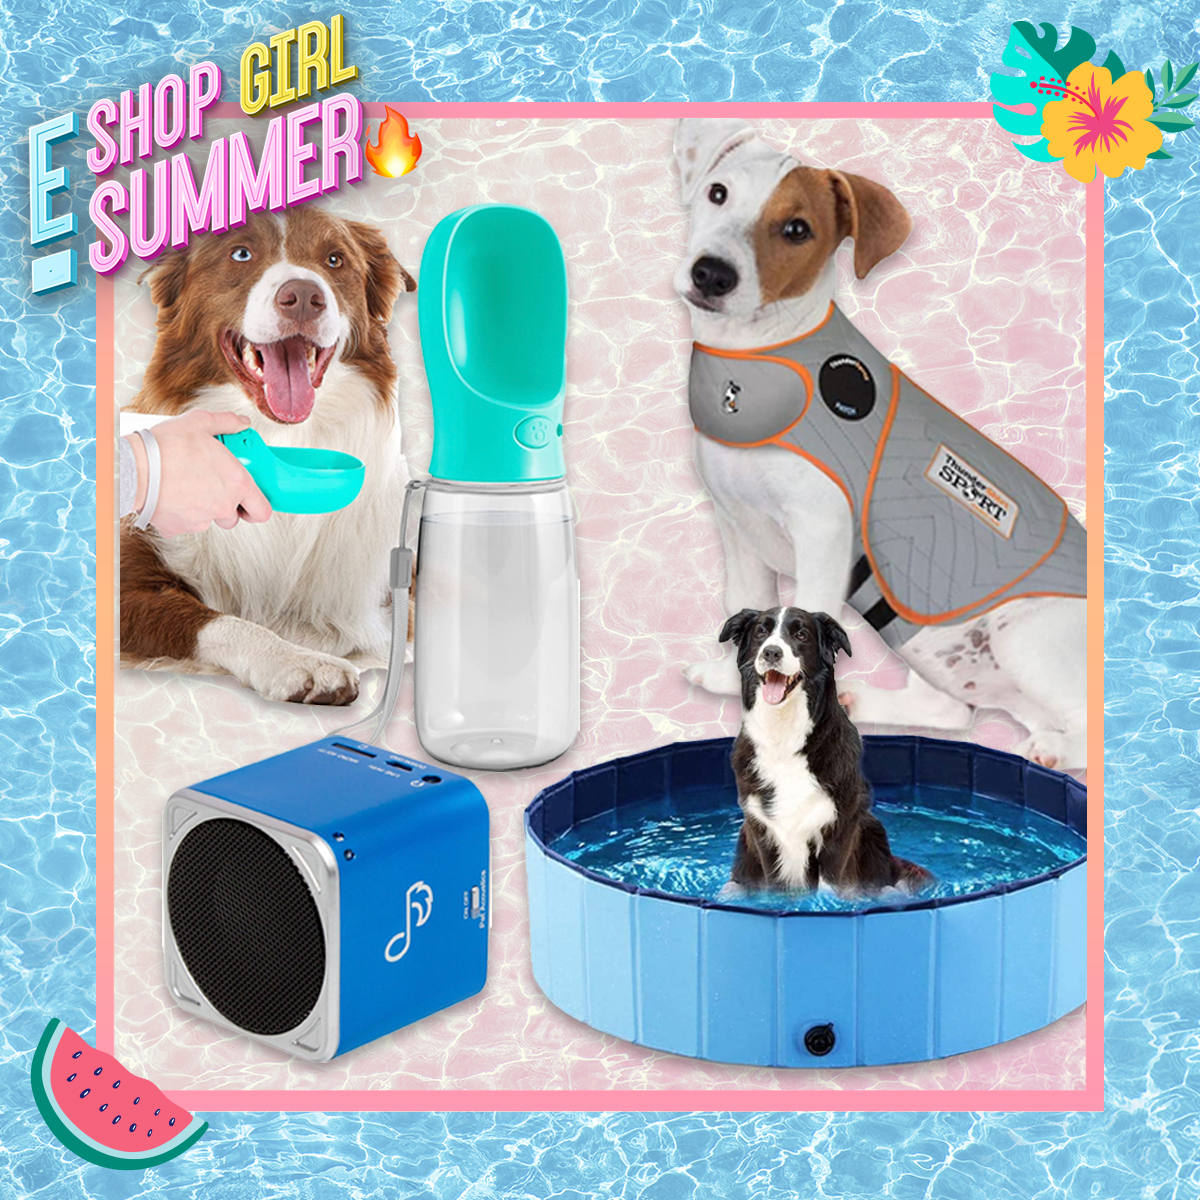 https://akns-images.eonline.com/eol_images/Entire_Site/2023516/rs_1200x1200-230616111640-1200-Summer-Pet-Products-LT-061623.jpg?fit=around%7C1080:1080&output-quality=90&crop=1080:1080;center,top